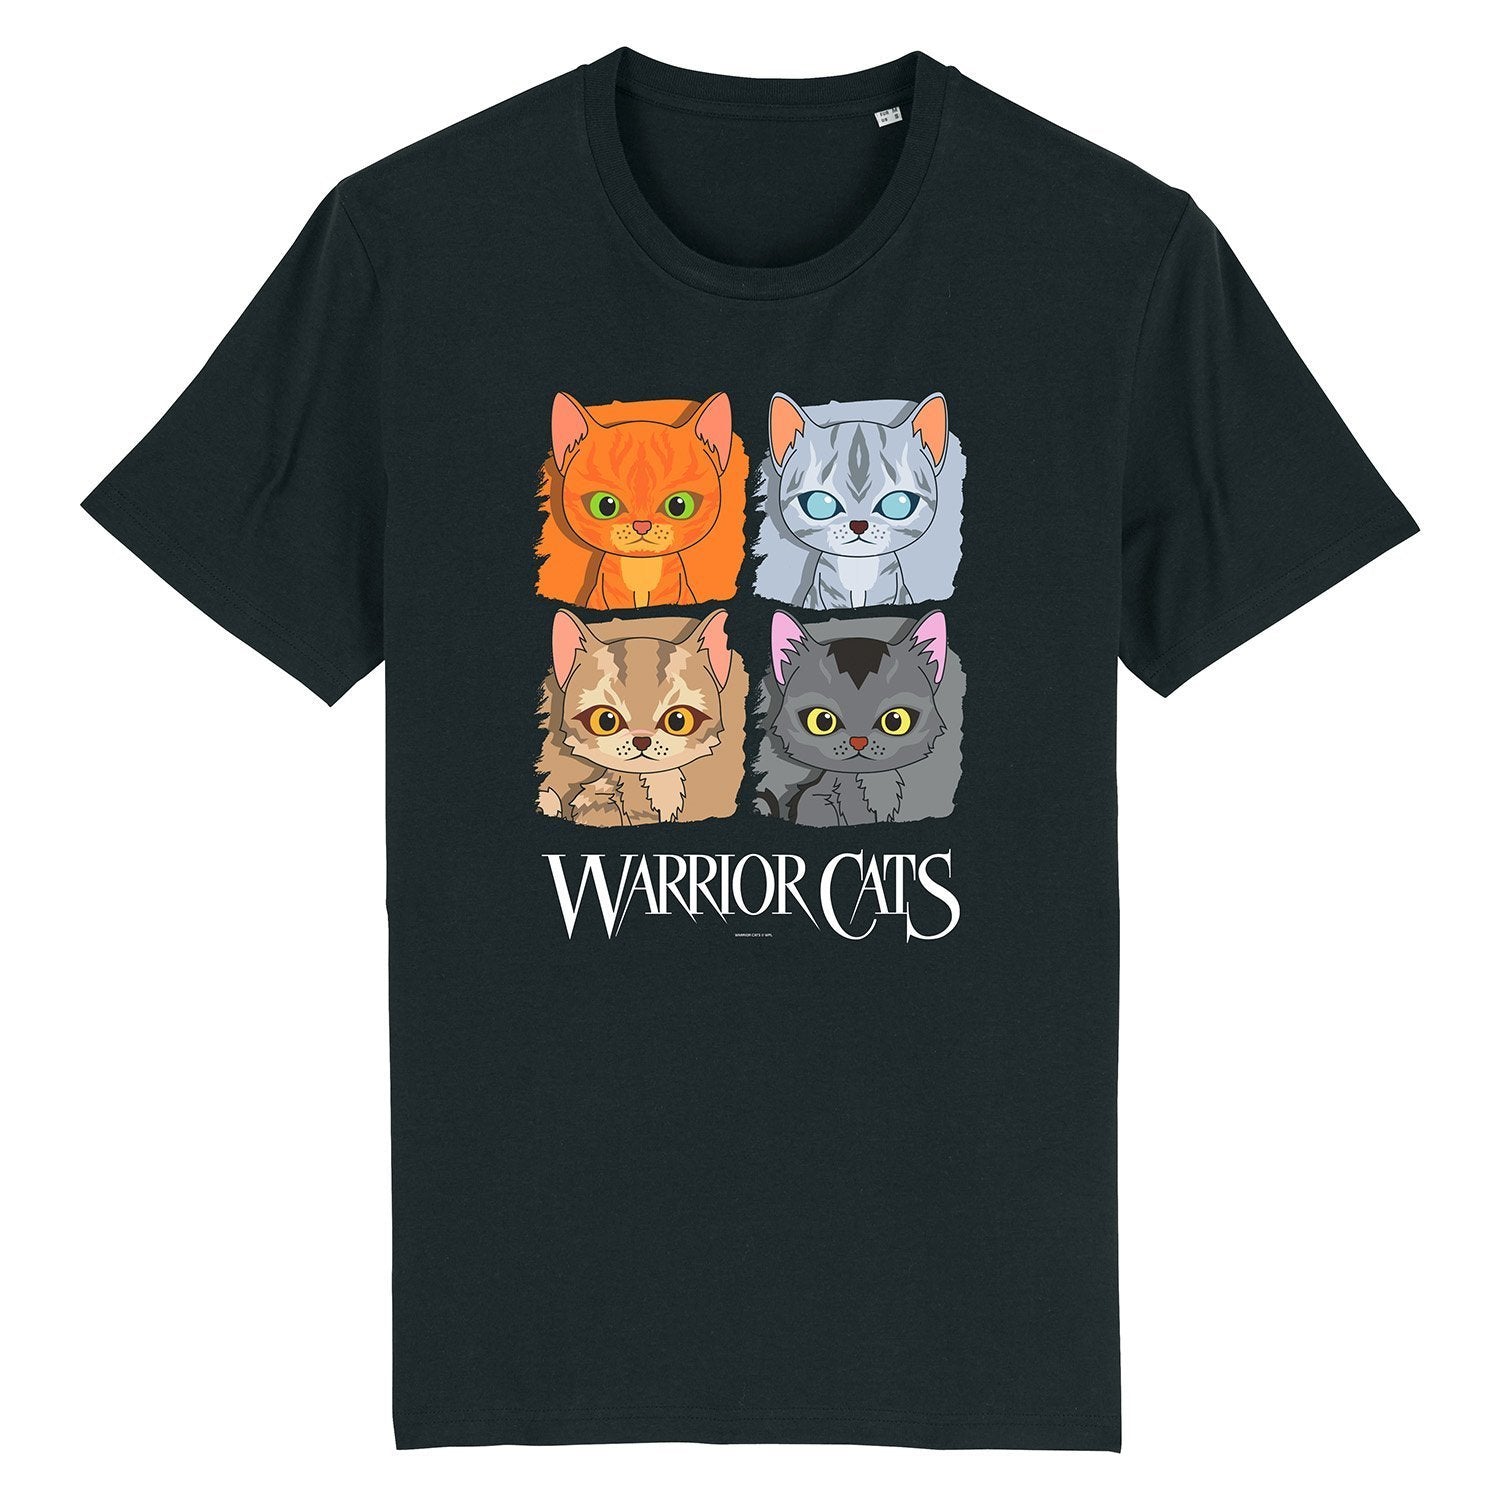 RGB Warrior Cats - Four Cats - Youth Unisex T-Shirt Youth Short Sleeve Tee / Youth X-Large / Black